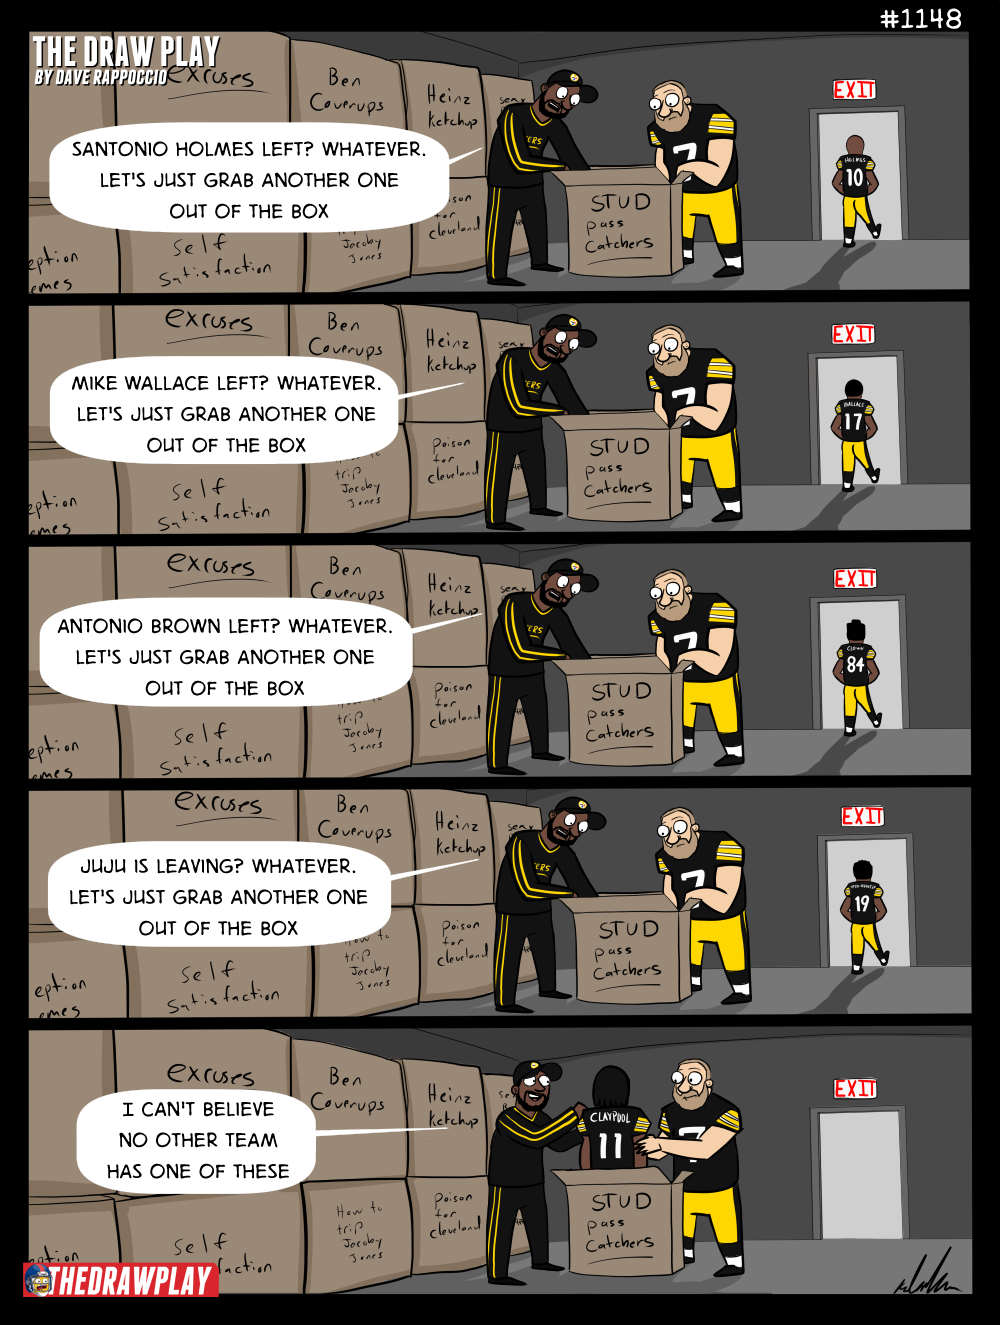 Steelers - The Draw Play